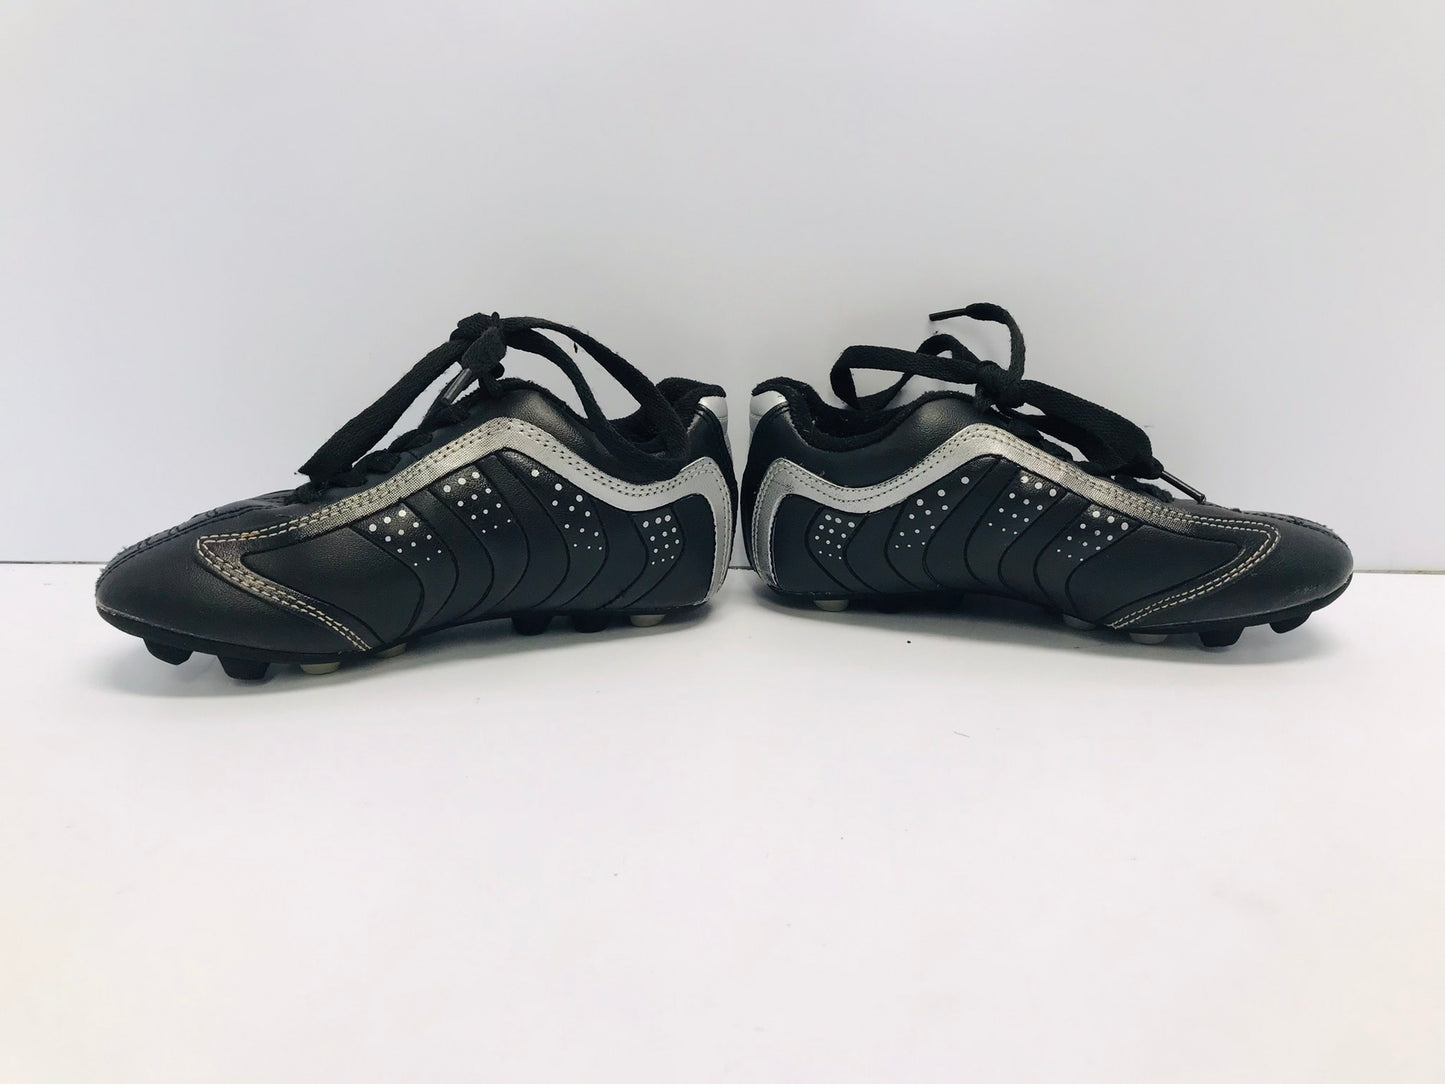 Soccer Shoes Cleats Child Size 12 Athletic Black